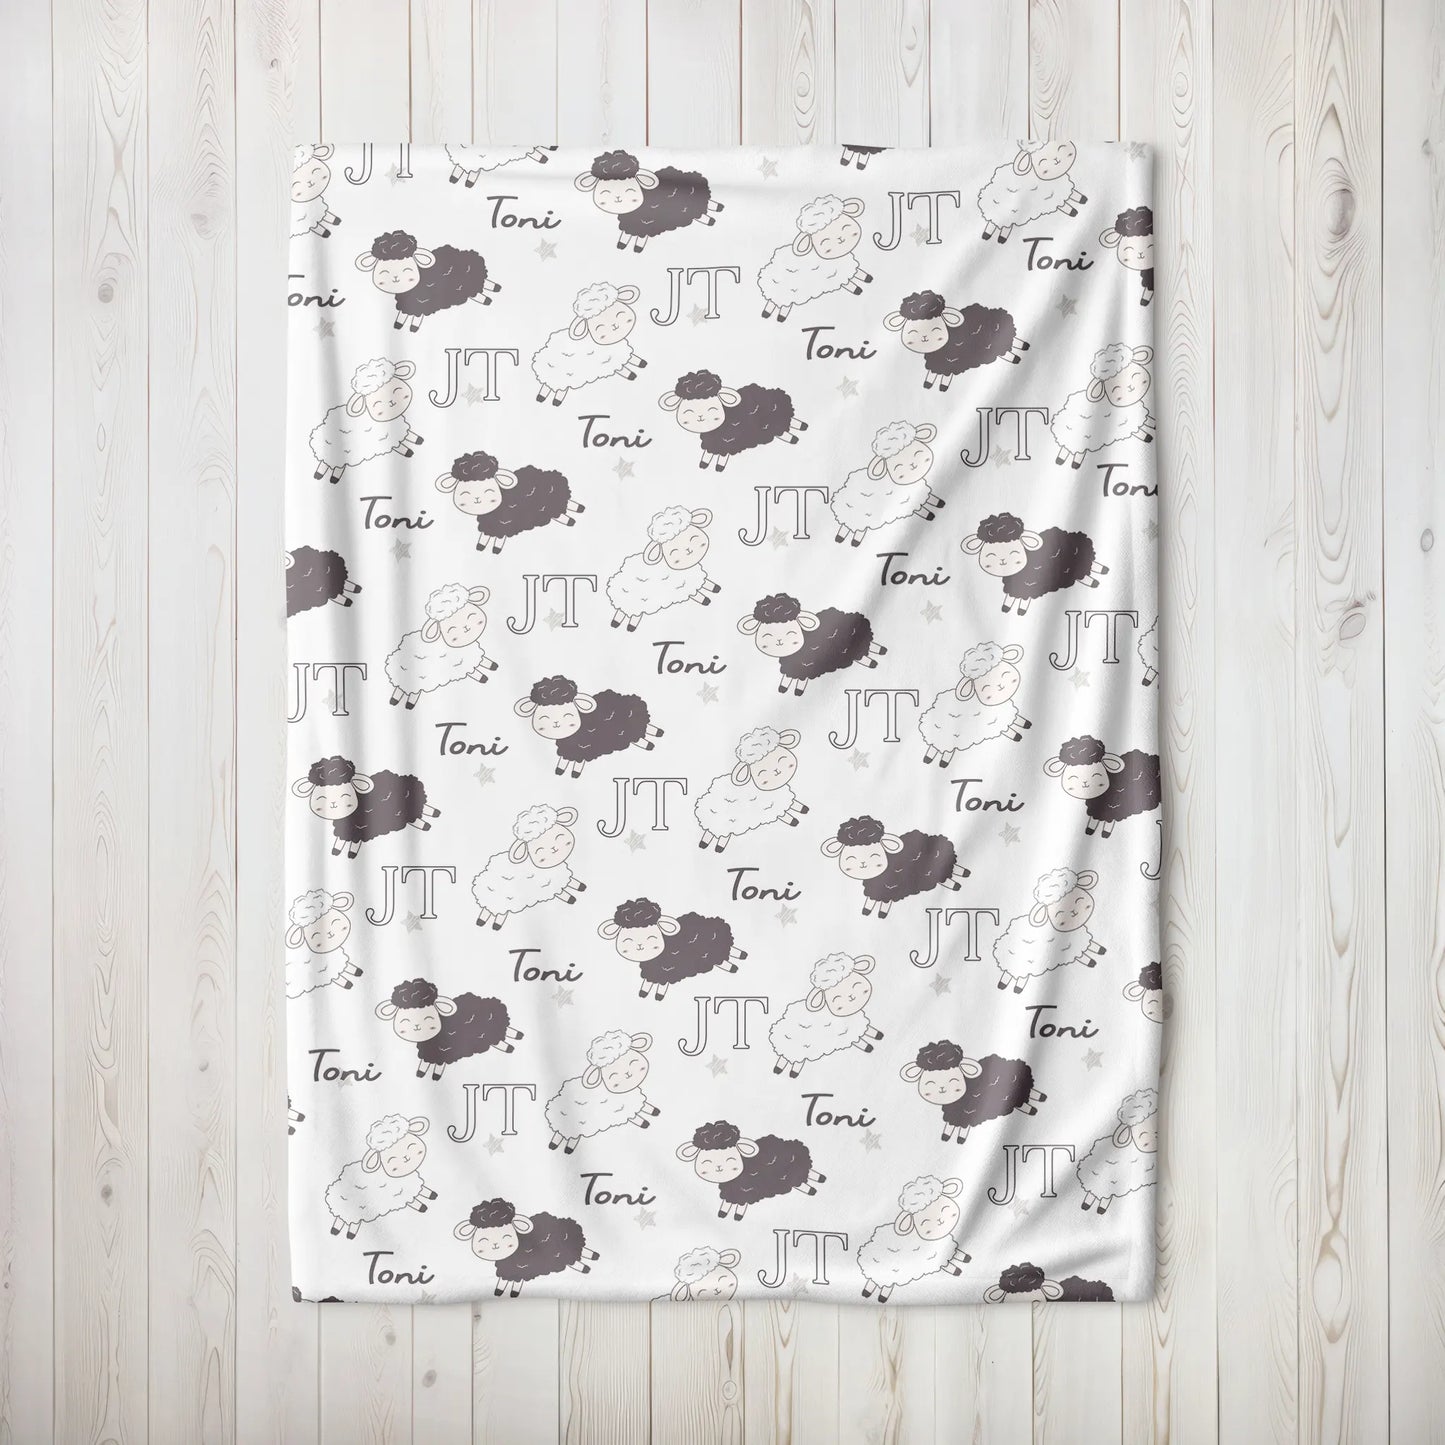 Personalized Gift | Custom Name Blanket For Kids | Happy Sheep BL-17